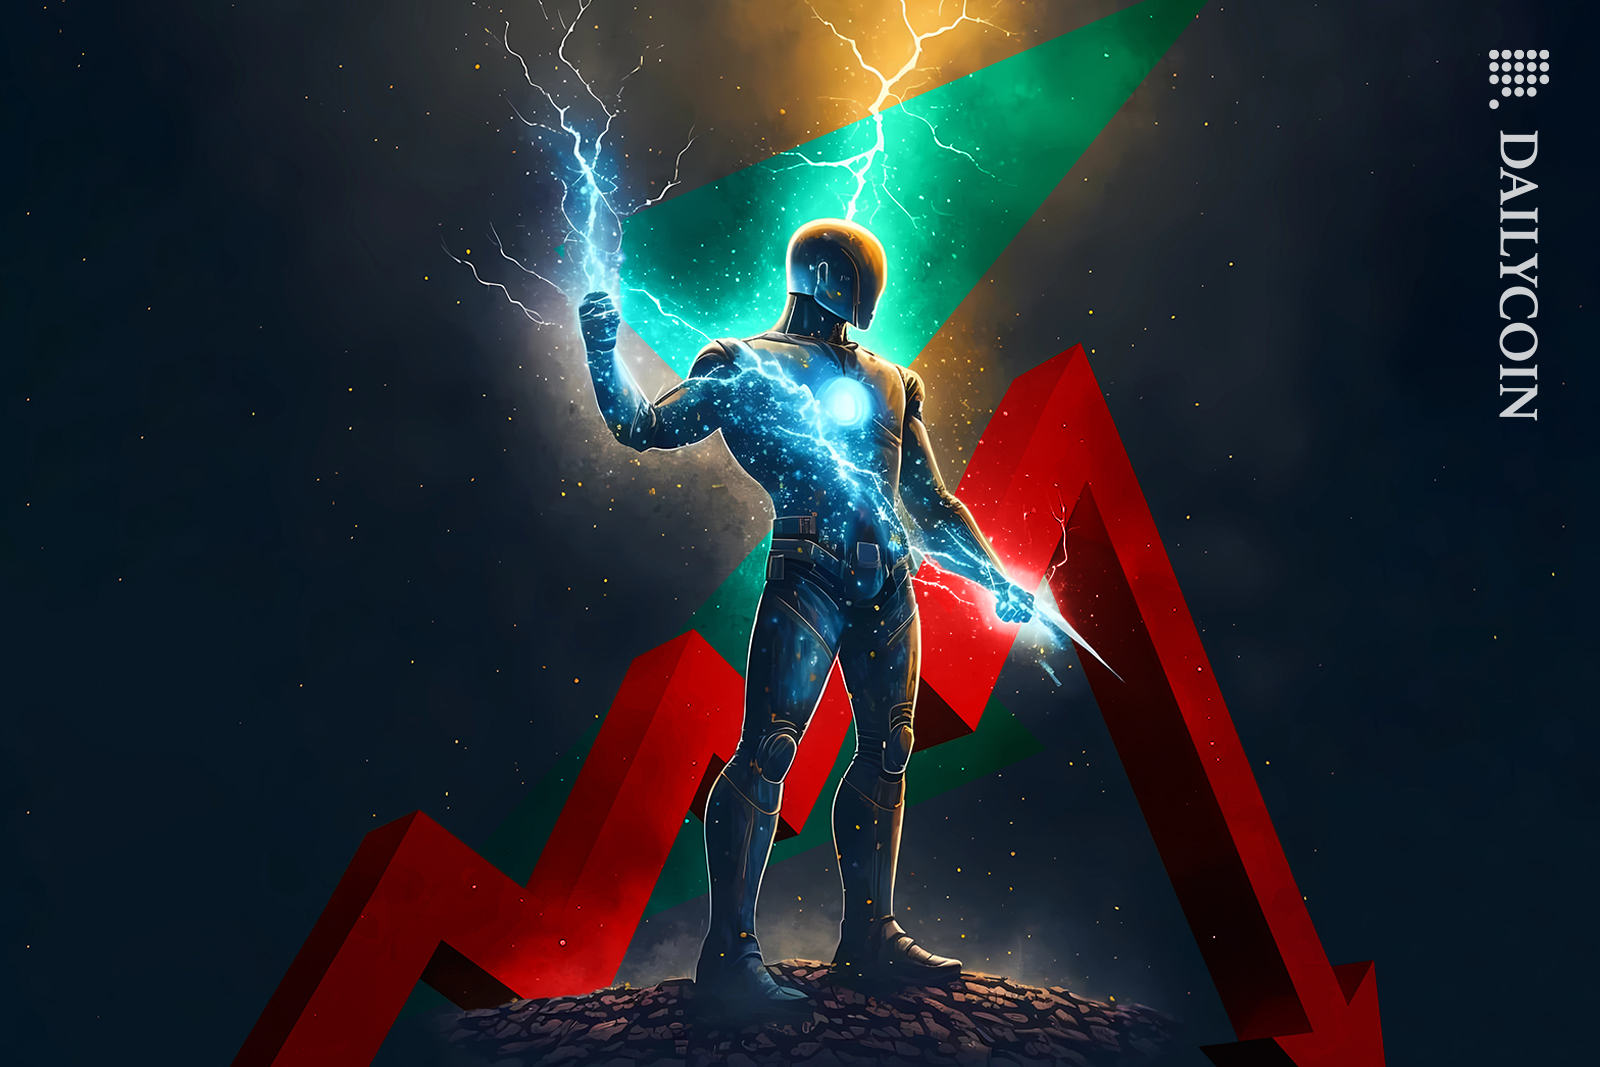 ThorChain (RUNE) character thrives whilst the market is down.